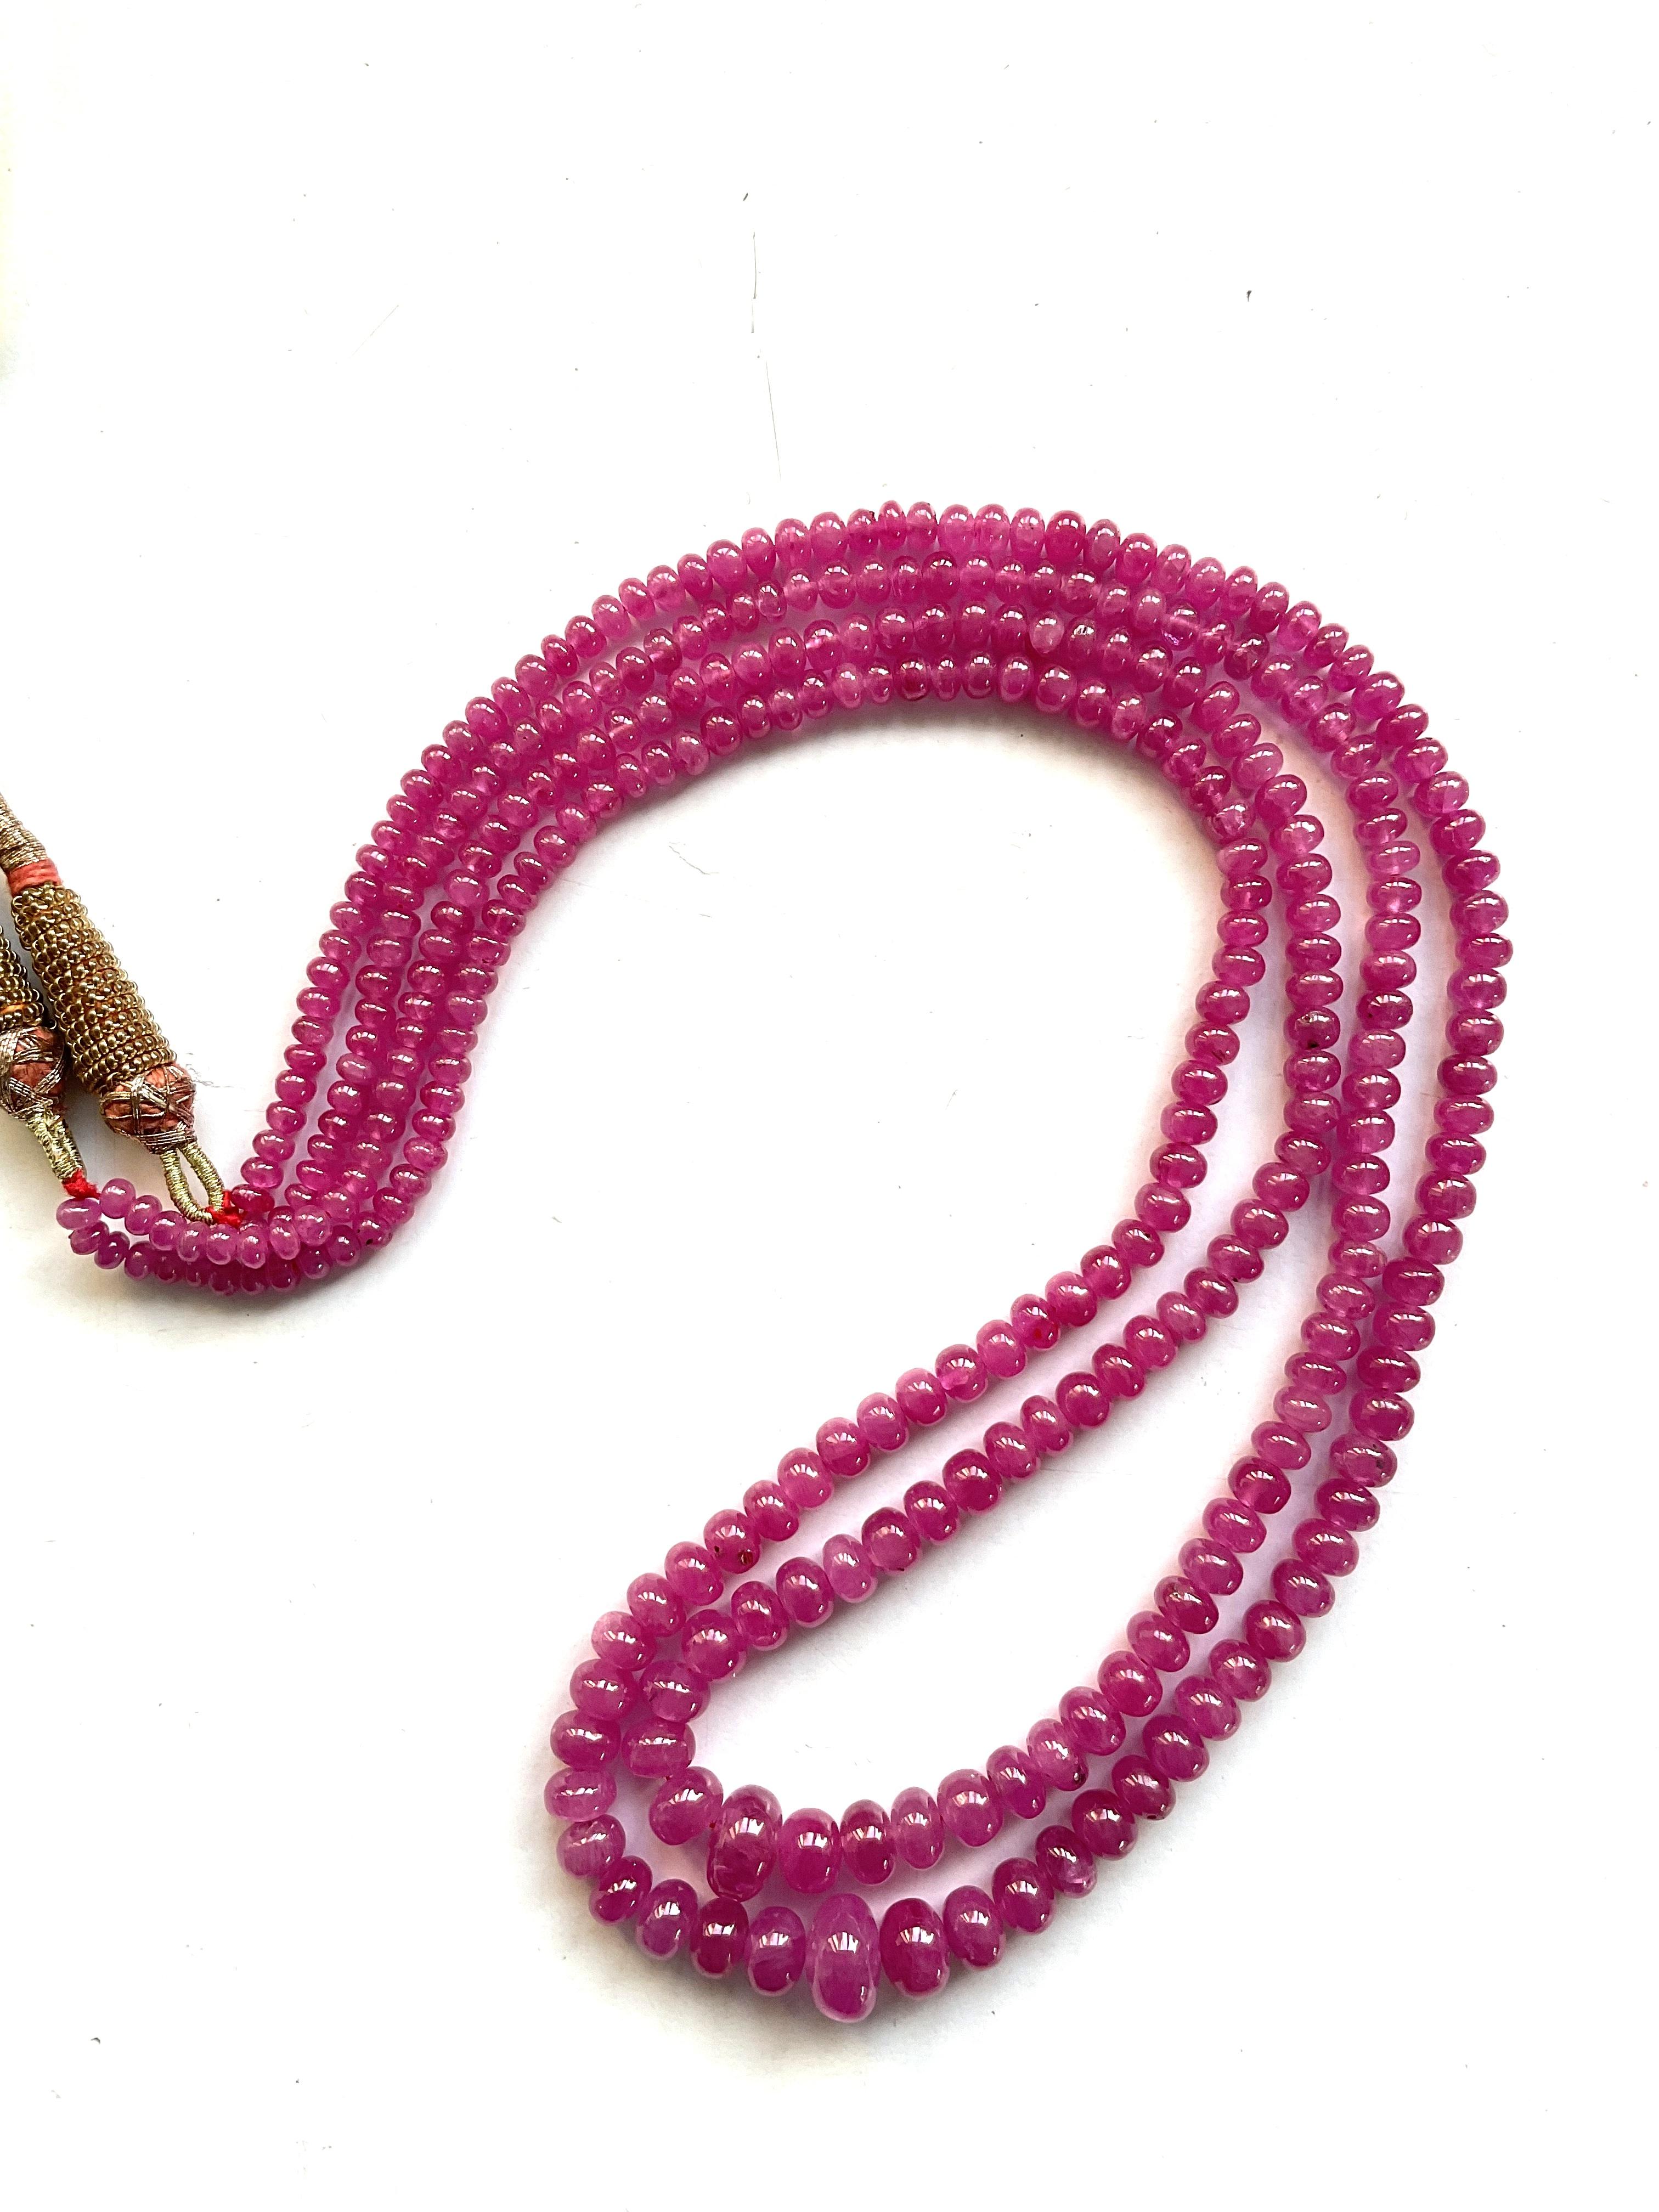 179.32 Carats Burma Ruby Heated Beaded Necklace Top Quality Natural Gemstone 5